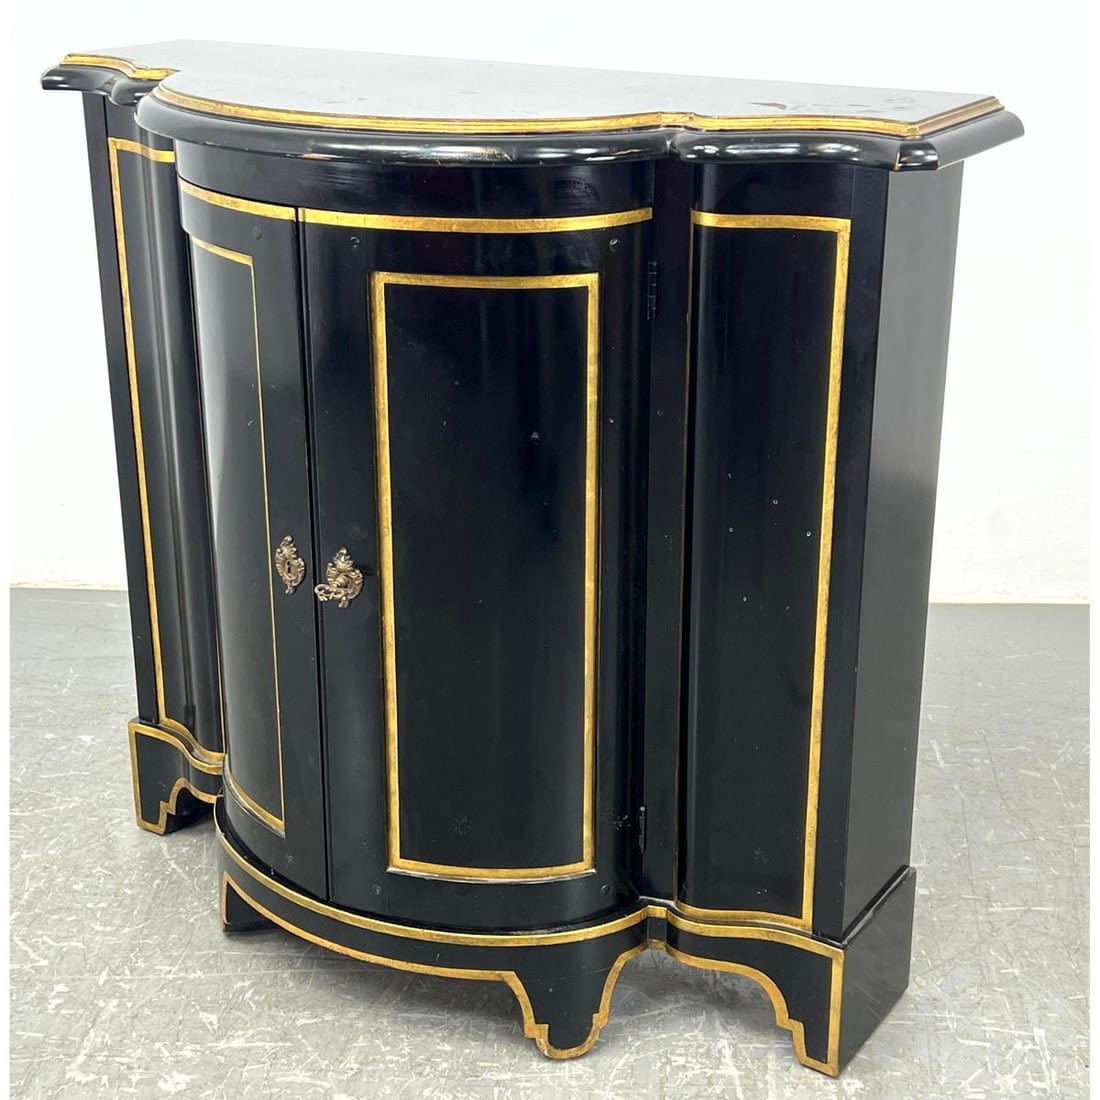 Black Lacquer Bow front Server